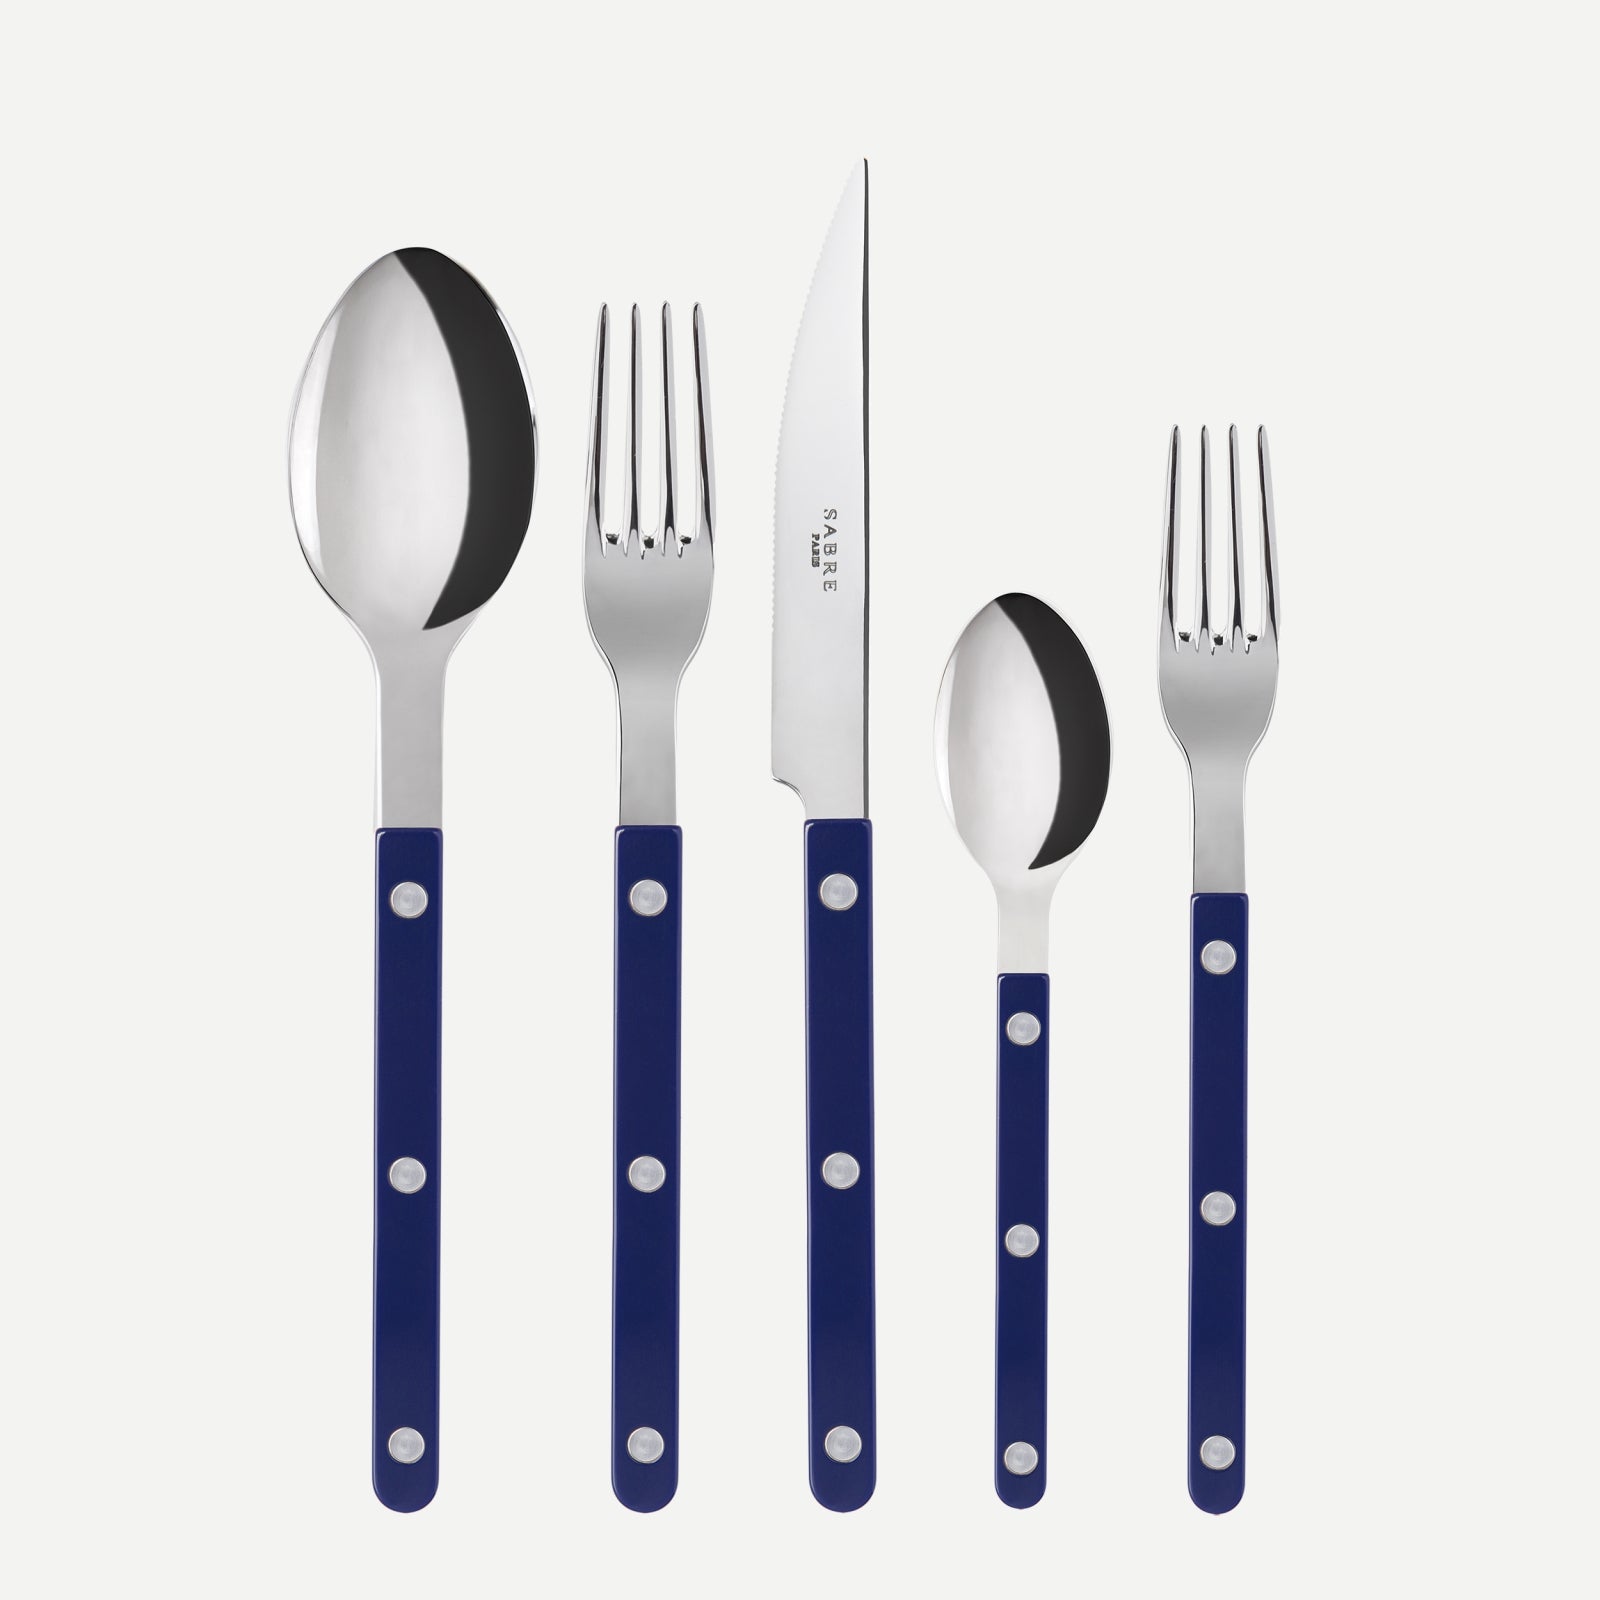 5 pieces set - Bistrot shiny solid - Navy blue